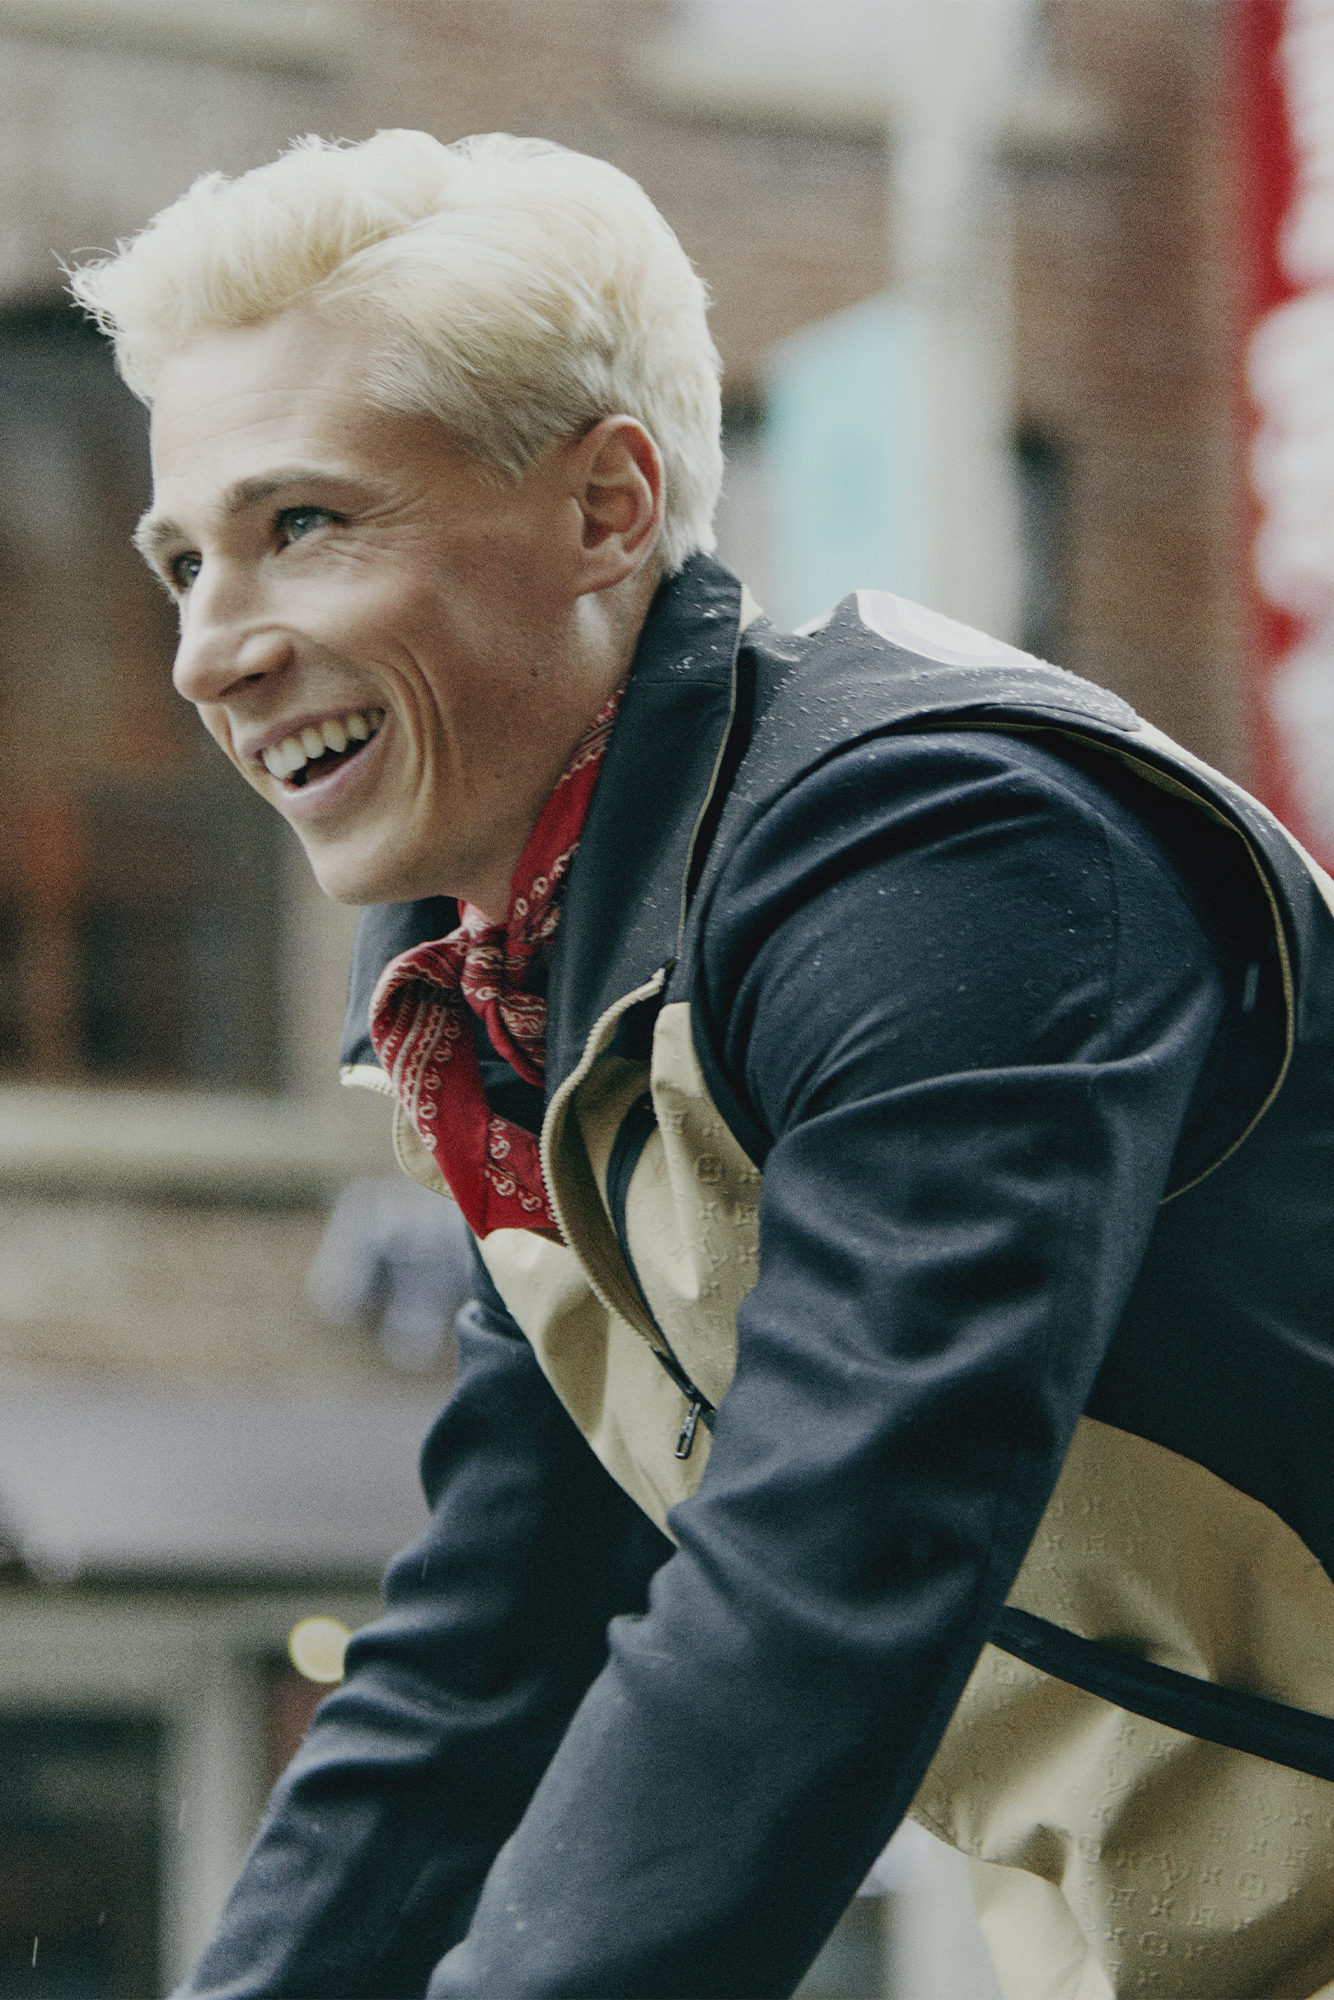 Male model in light brown and navy jacket and red handkerchief, side profile laughing and looking up